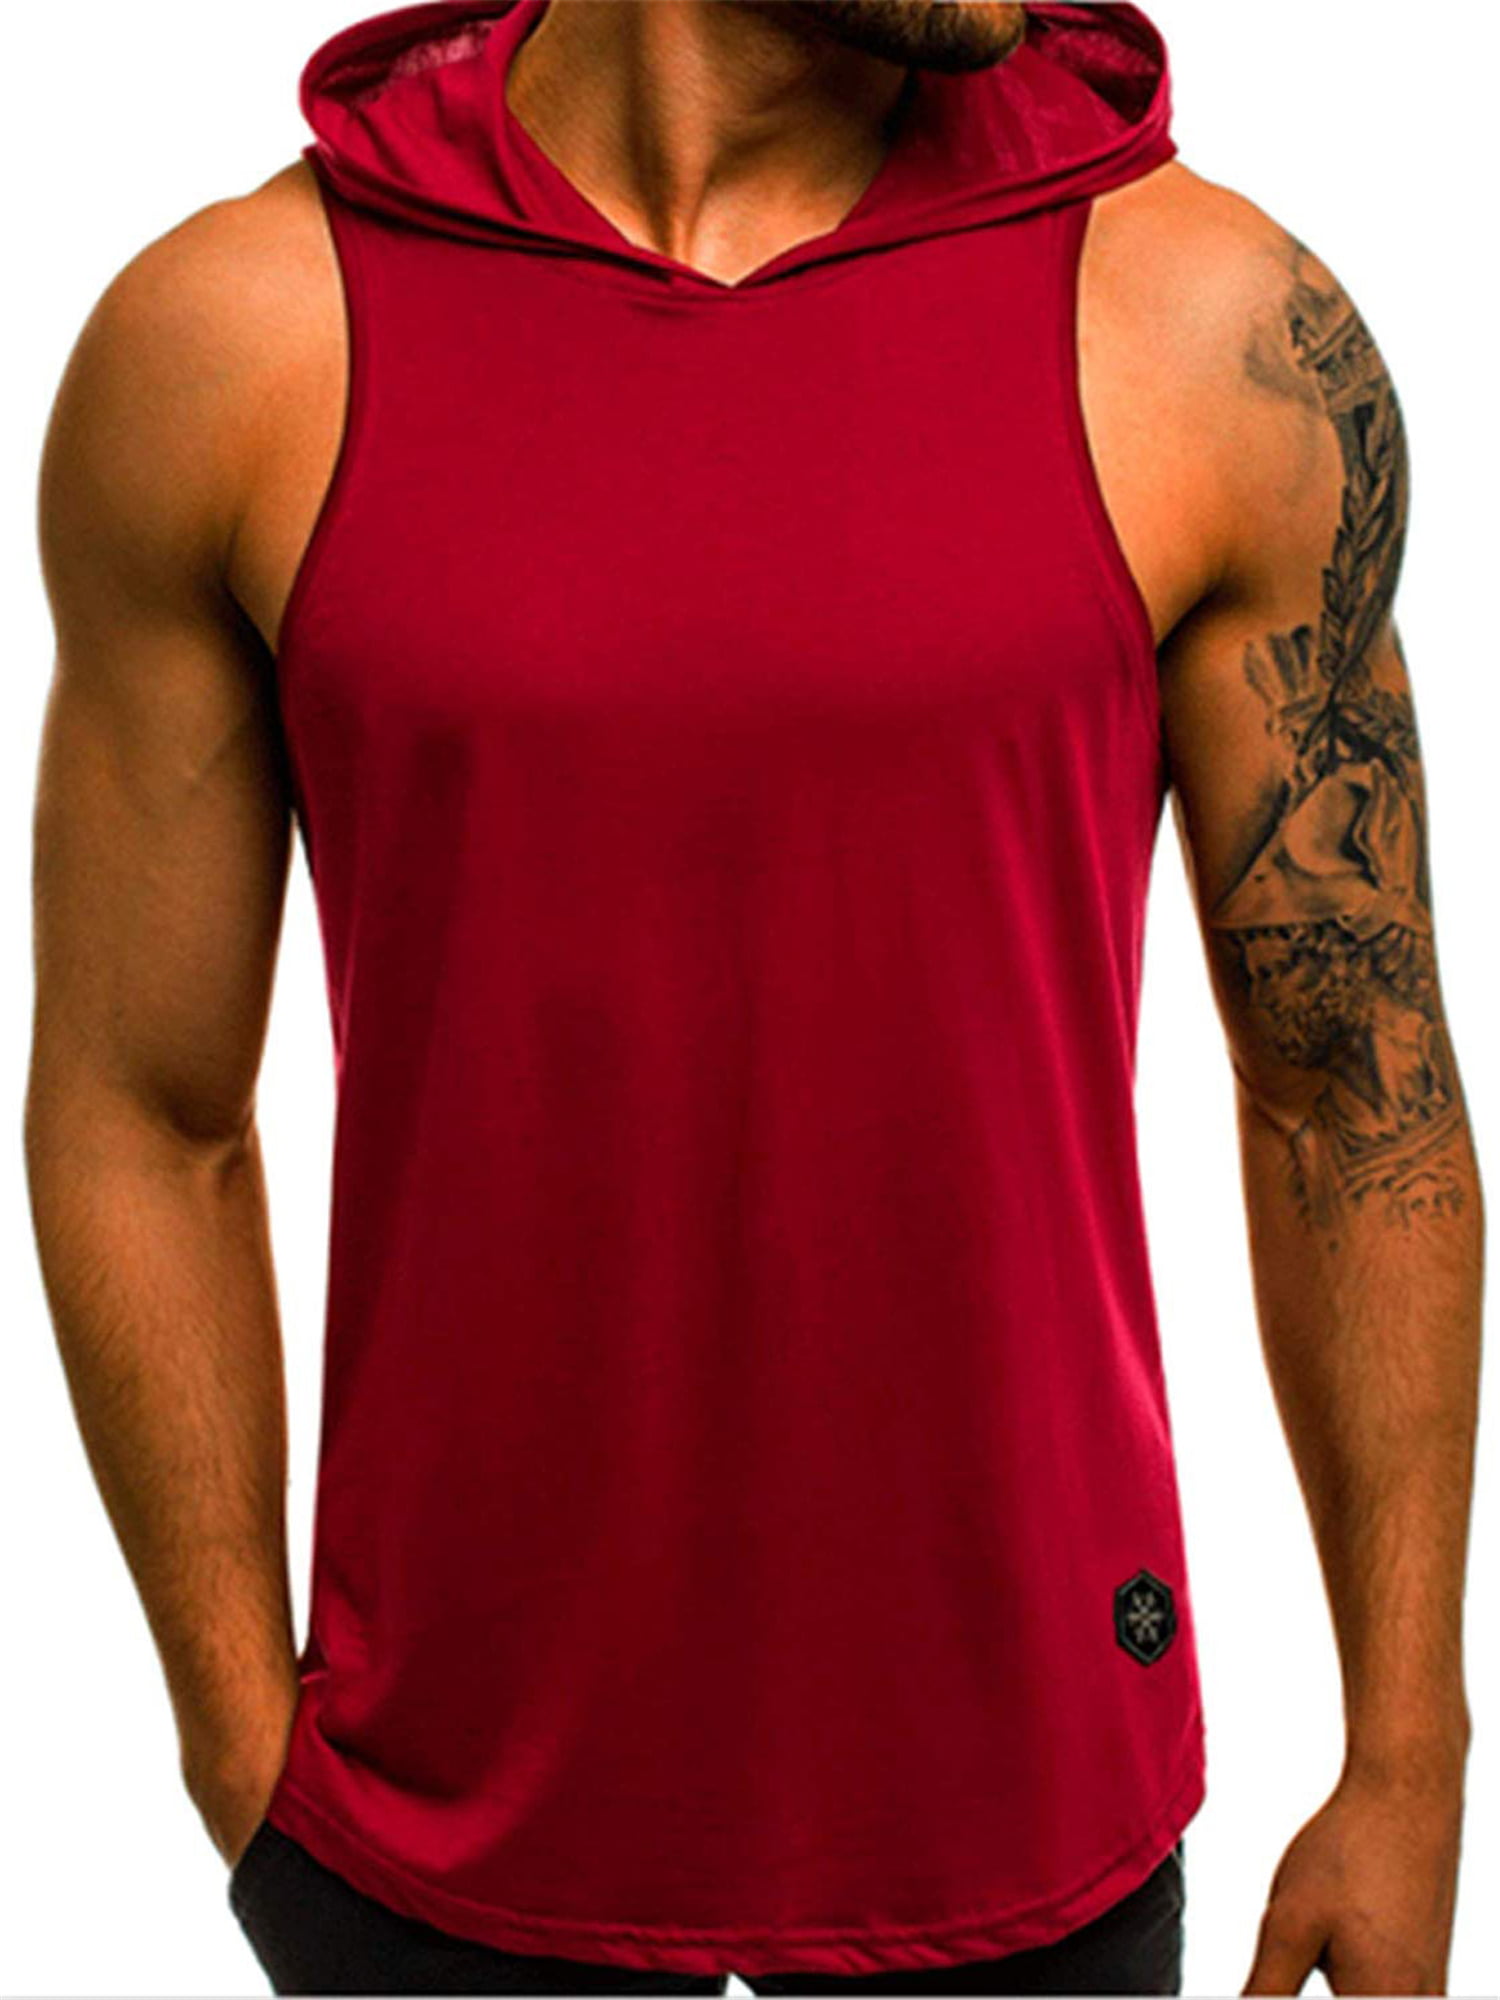 Aixdir Sleeveless Hoodie Men Workout Hooded Tank Top Gym Muscle Shirts with Pocket 